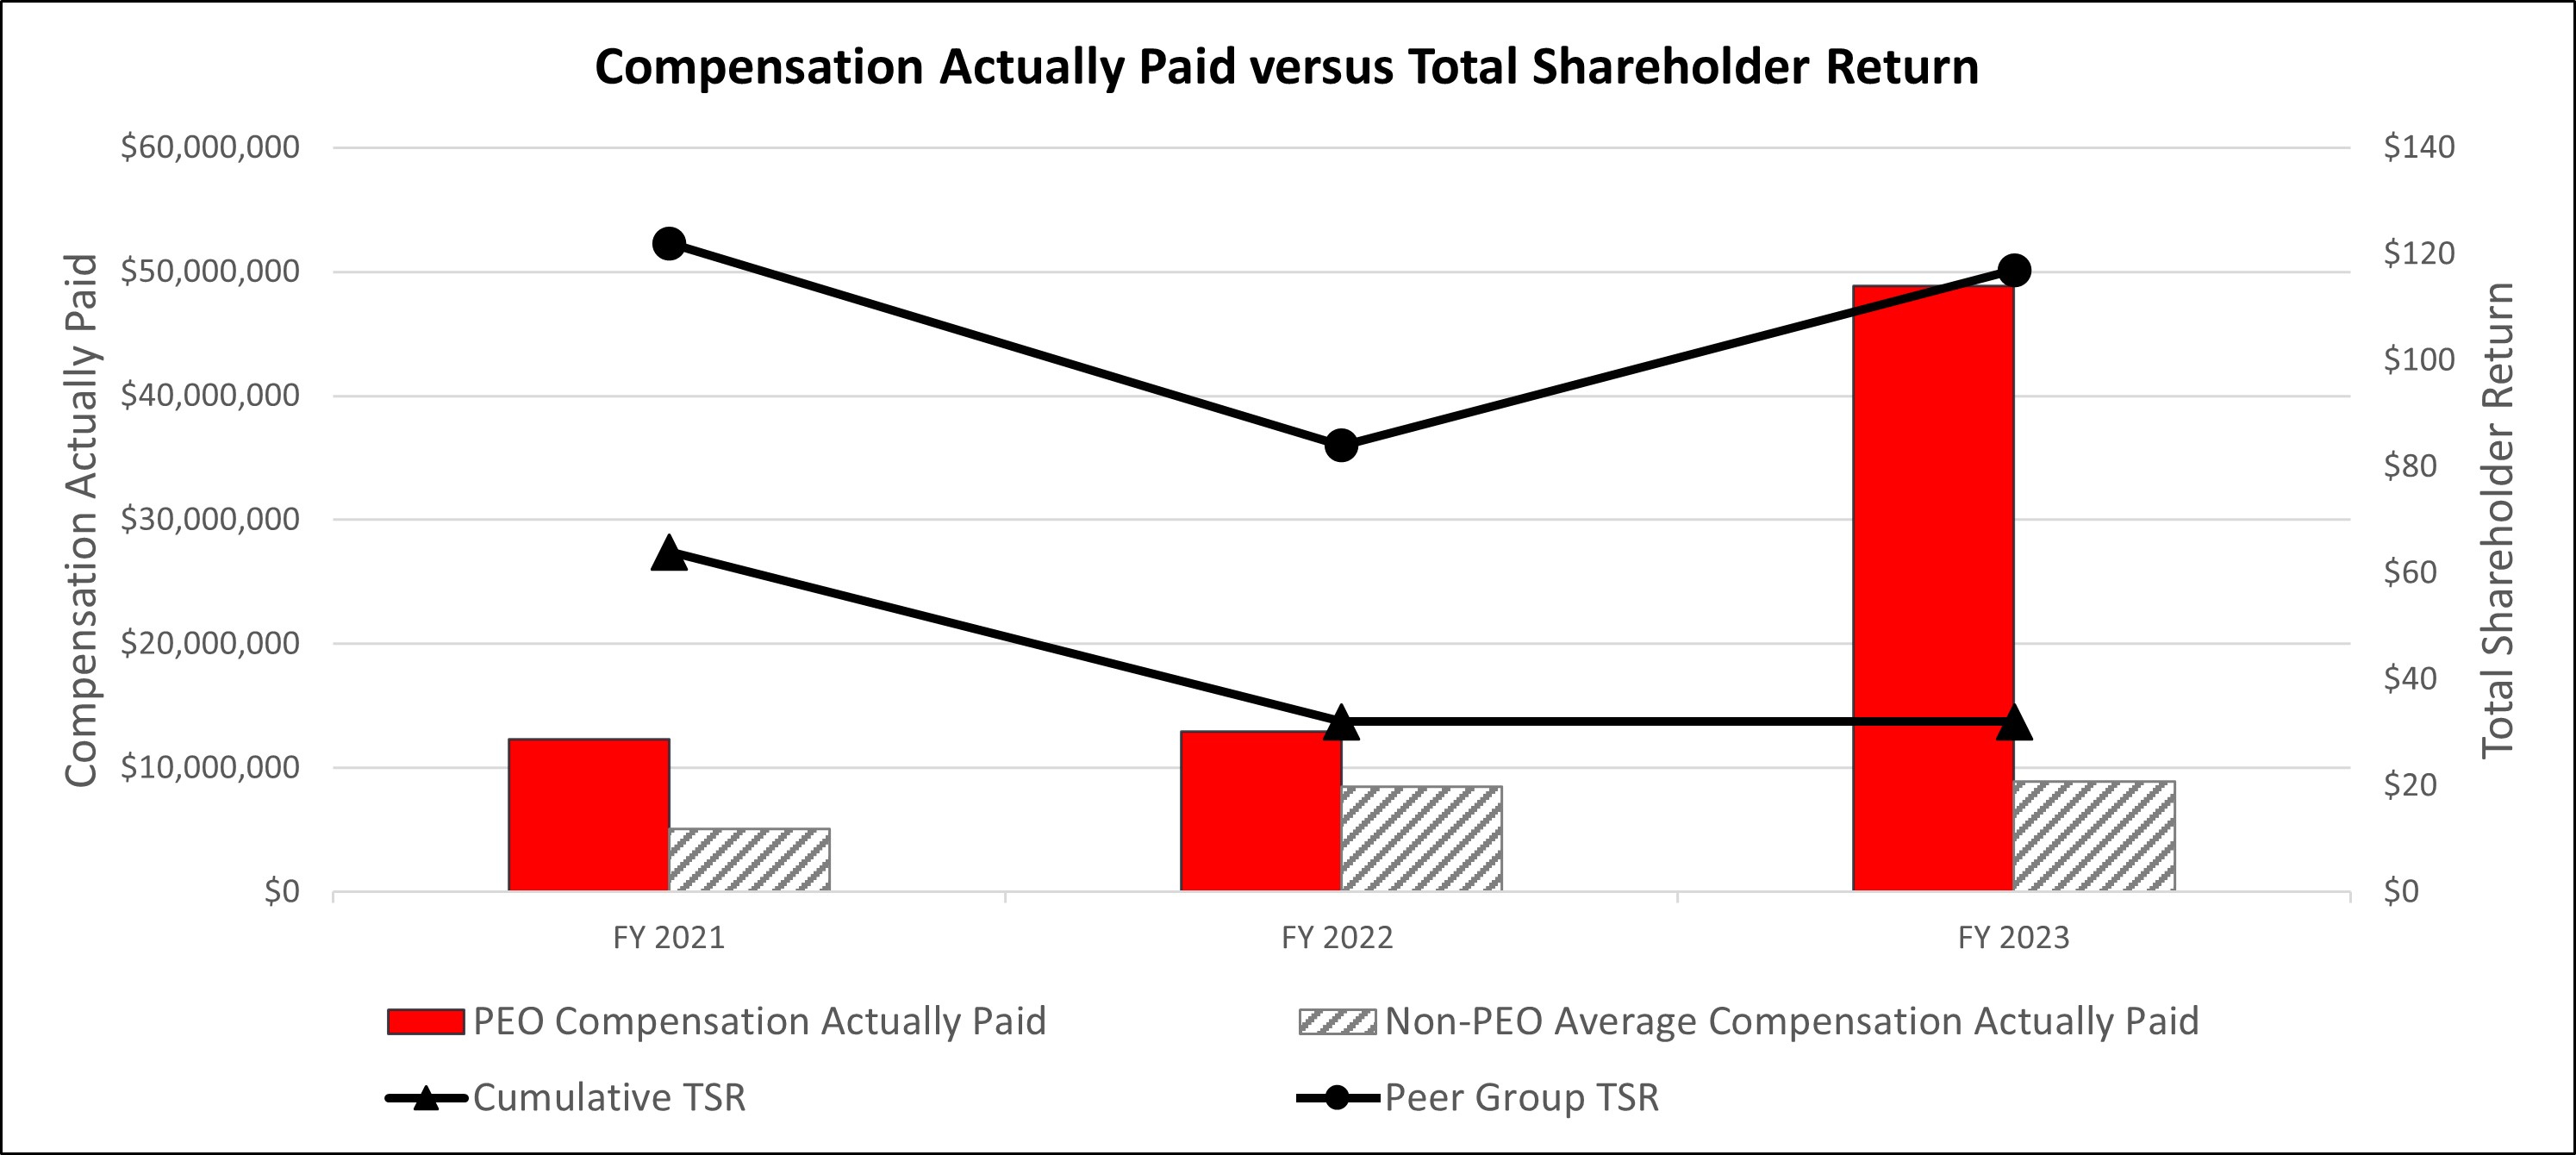 Compensation Actually Paid versus Total Shareholder Return.jpg